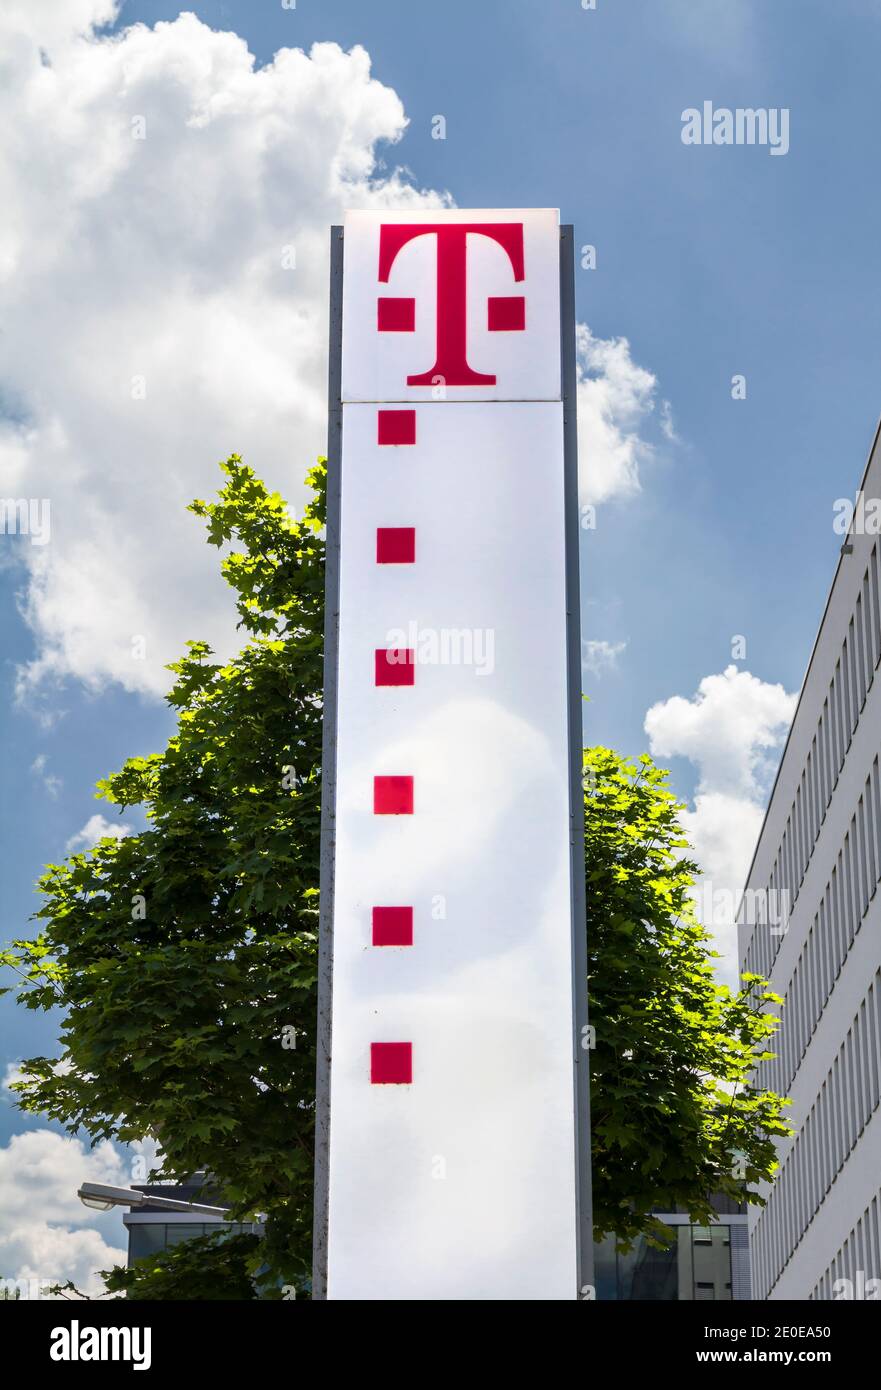 Nurnberg, German: T-Mobile is the brand name used by the mobile communications subsidiaries of the German telecommunications company Deutsche Telekom. Stock Photo